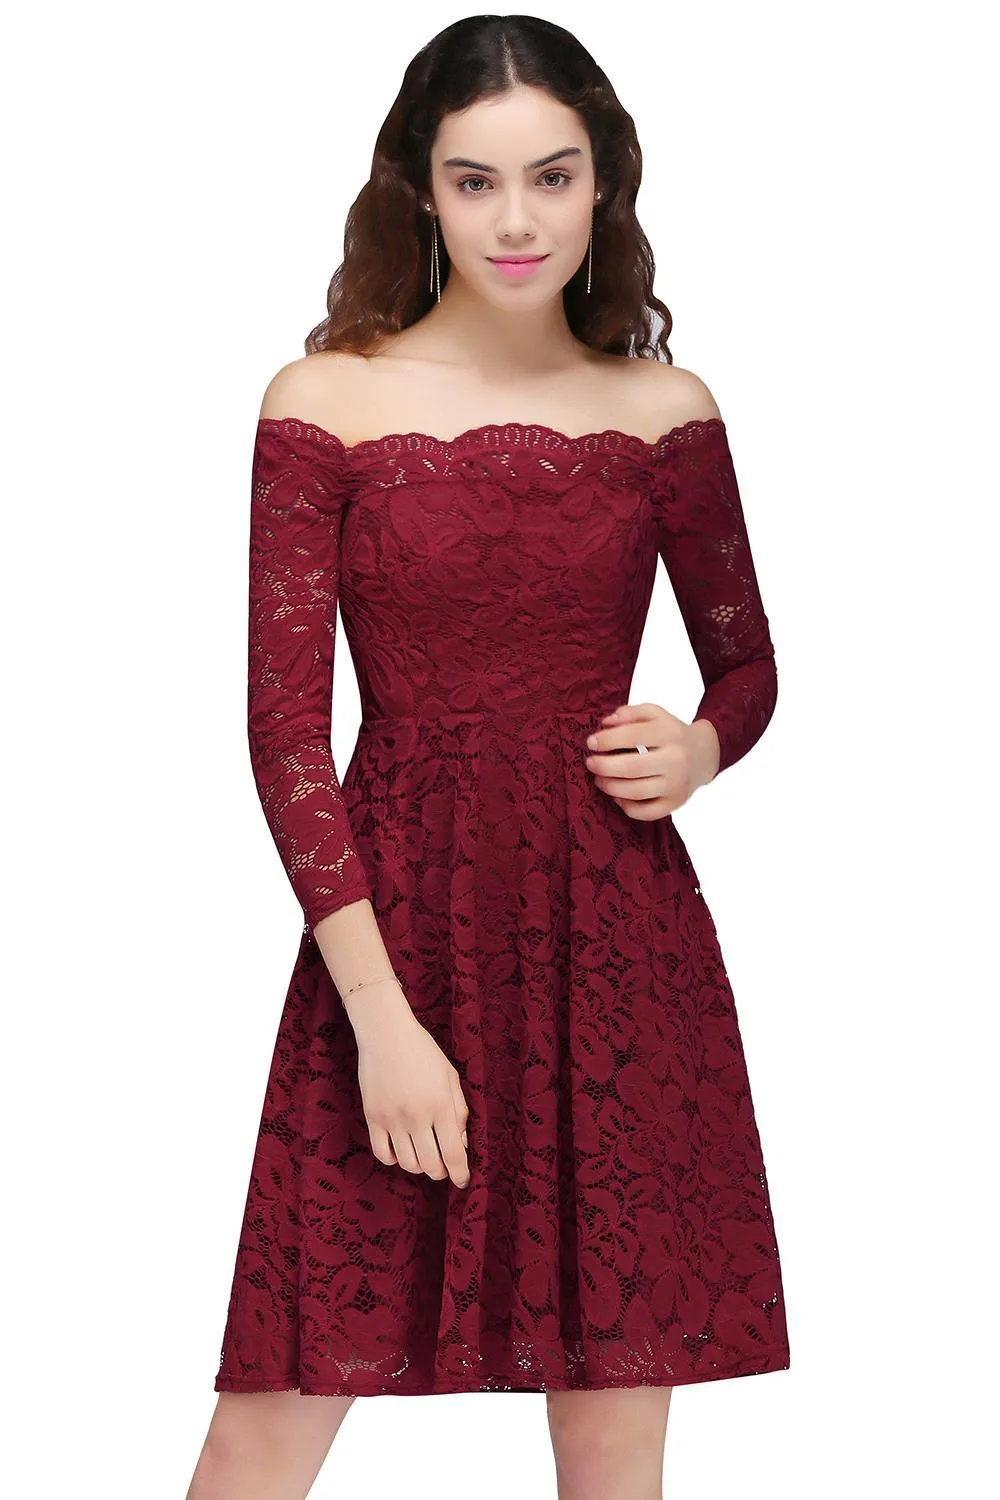 2018 New Design Lace Burgundy Party Homecoming Dresses Vintage Off Shoulders Long Sleeves Knee Length Cocktail Homecoming Dresses CPS694